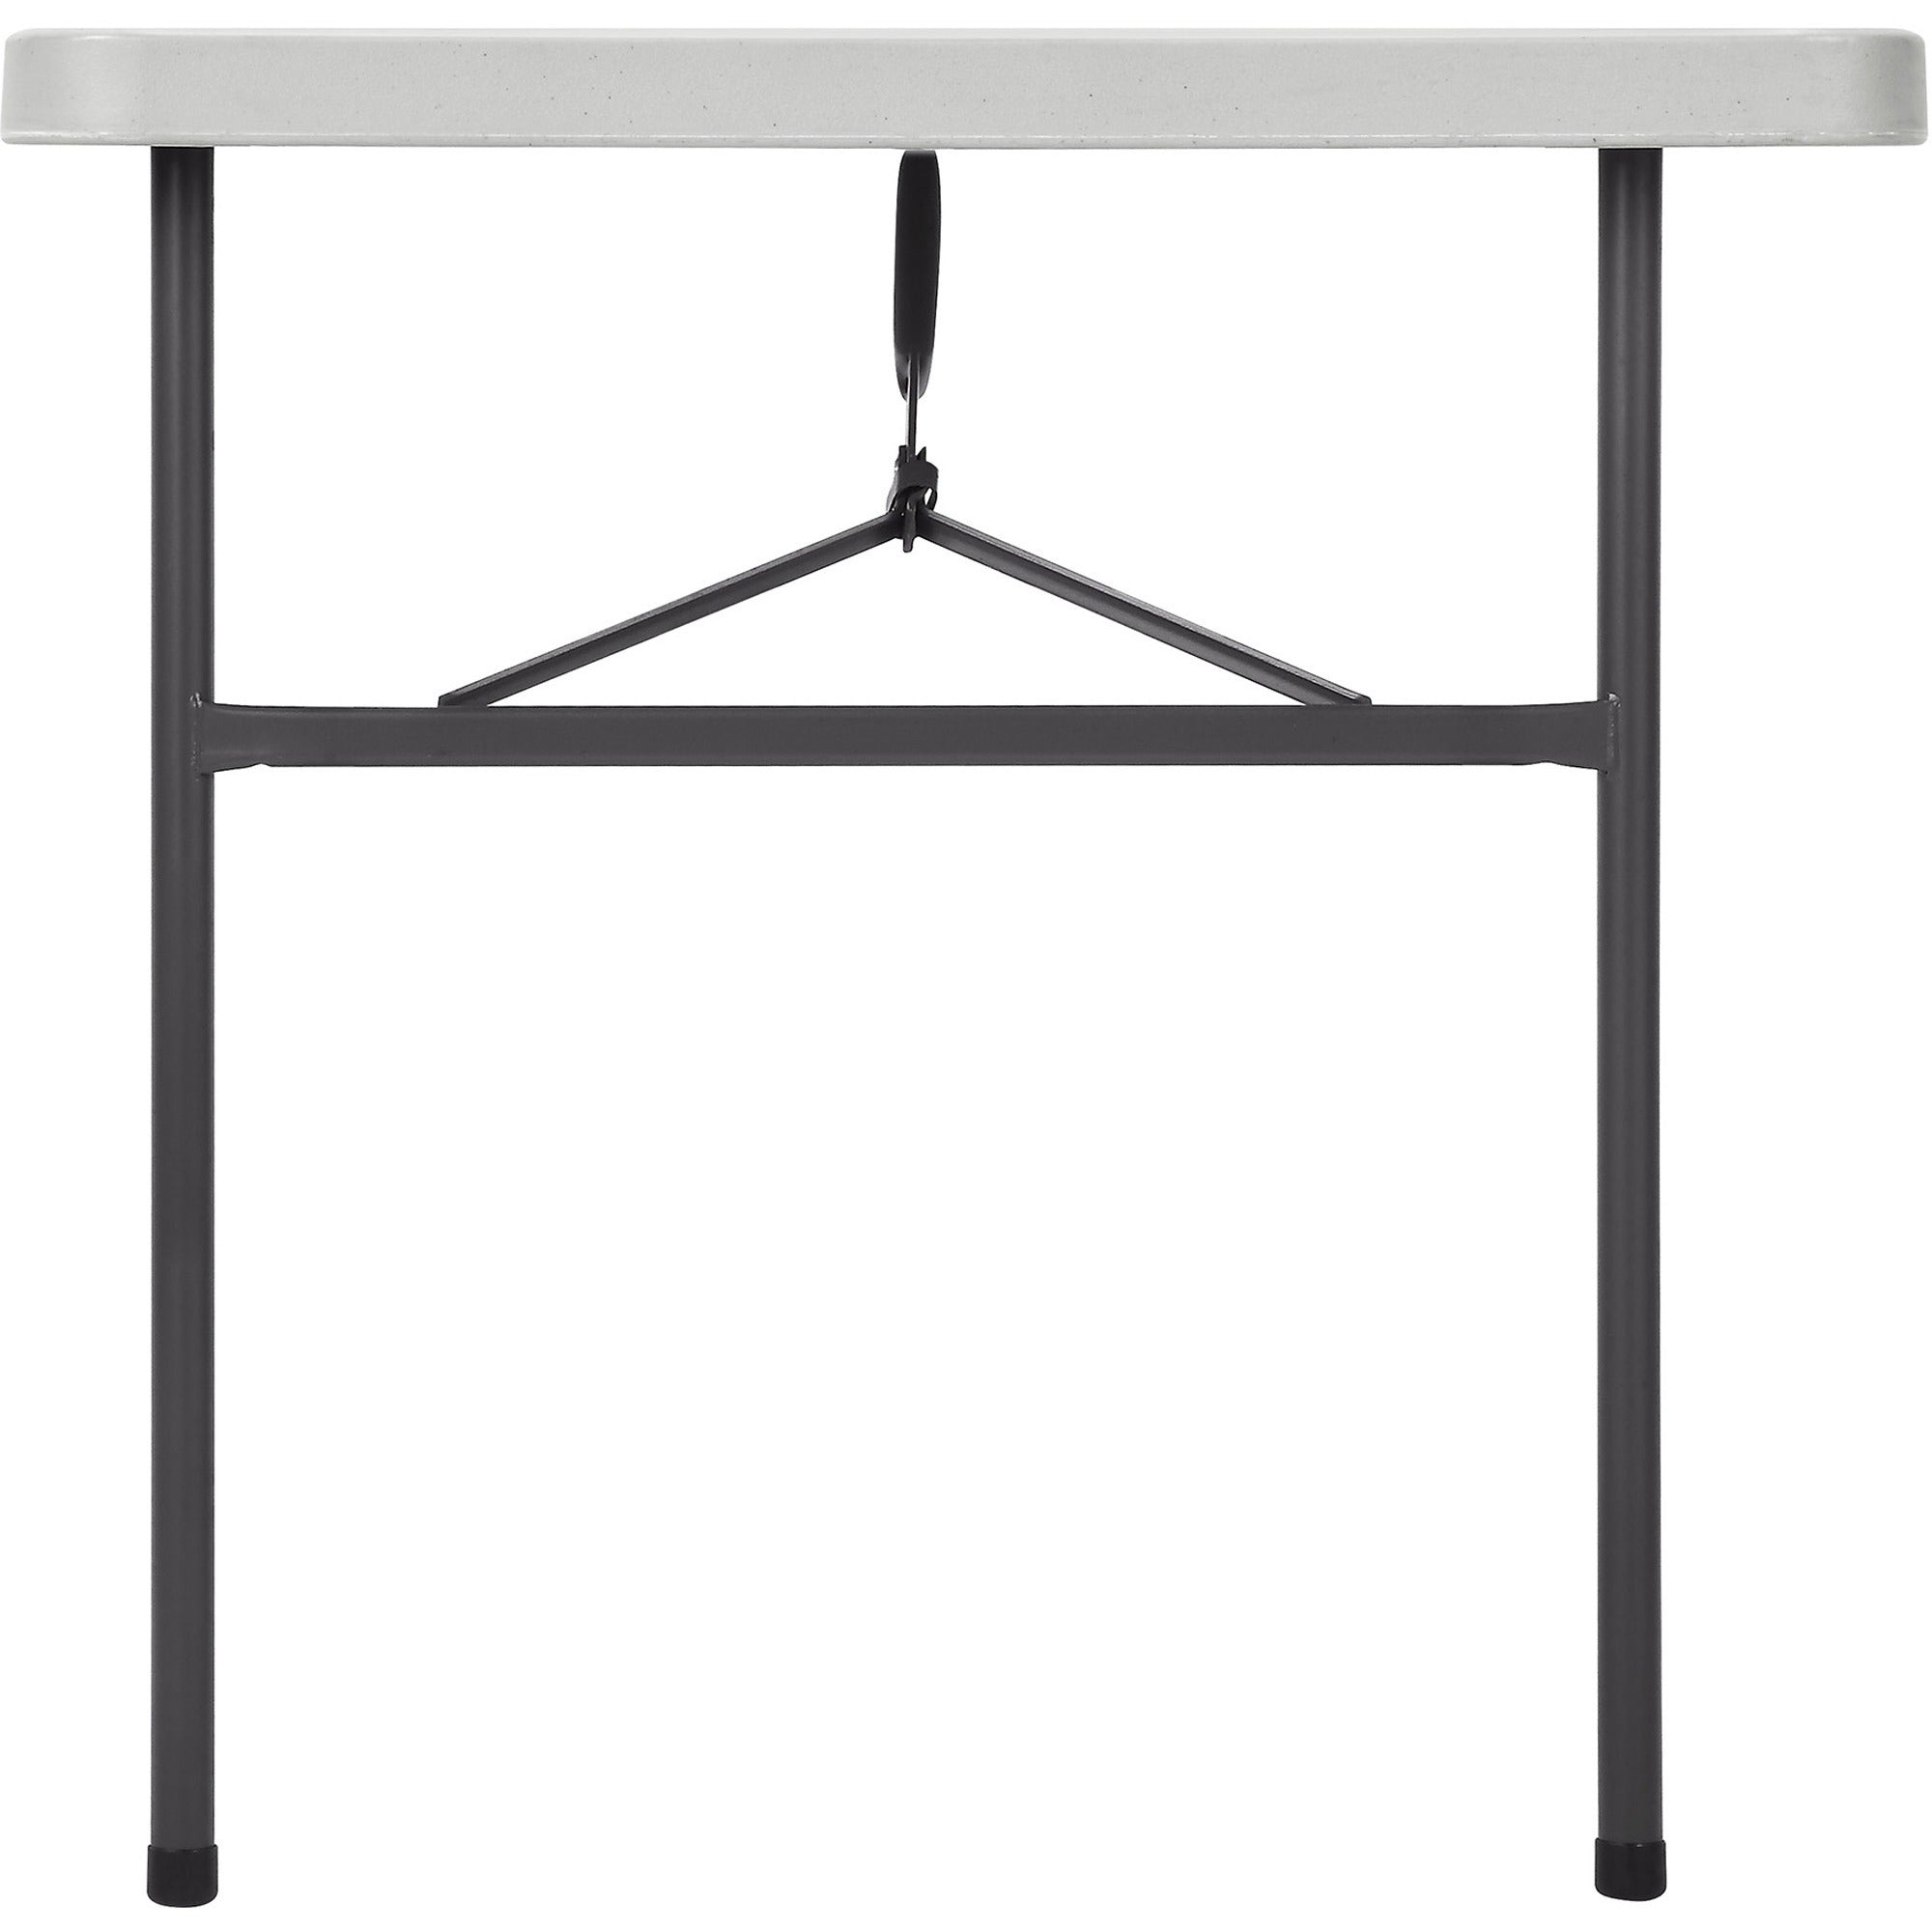 lorell-ultra-lite-banquet-table-for-table-toplight-gray-rectangle-top-dark-gray-base-450-lb-capacity-x-48-table-top-width-x-30-table-top-depth-x-2-table-top-thickness-29-height-gray-1-each_llr66657 - 5